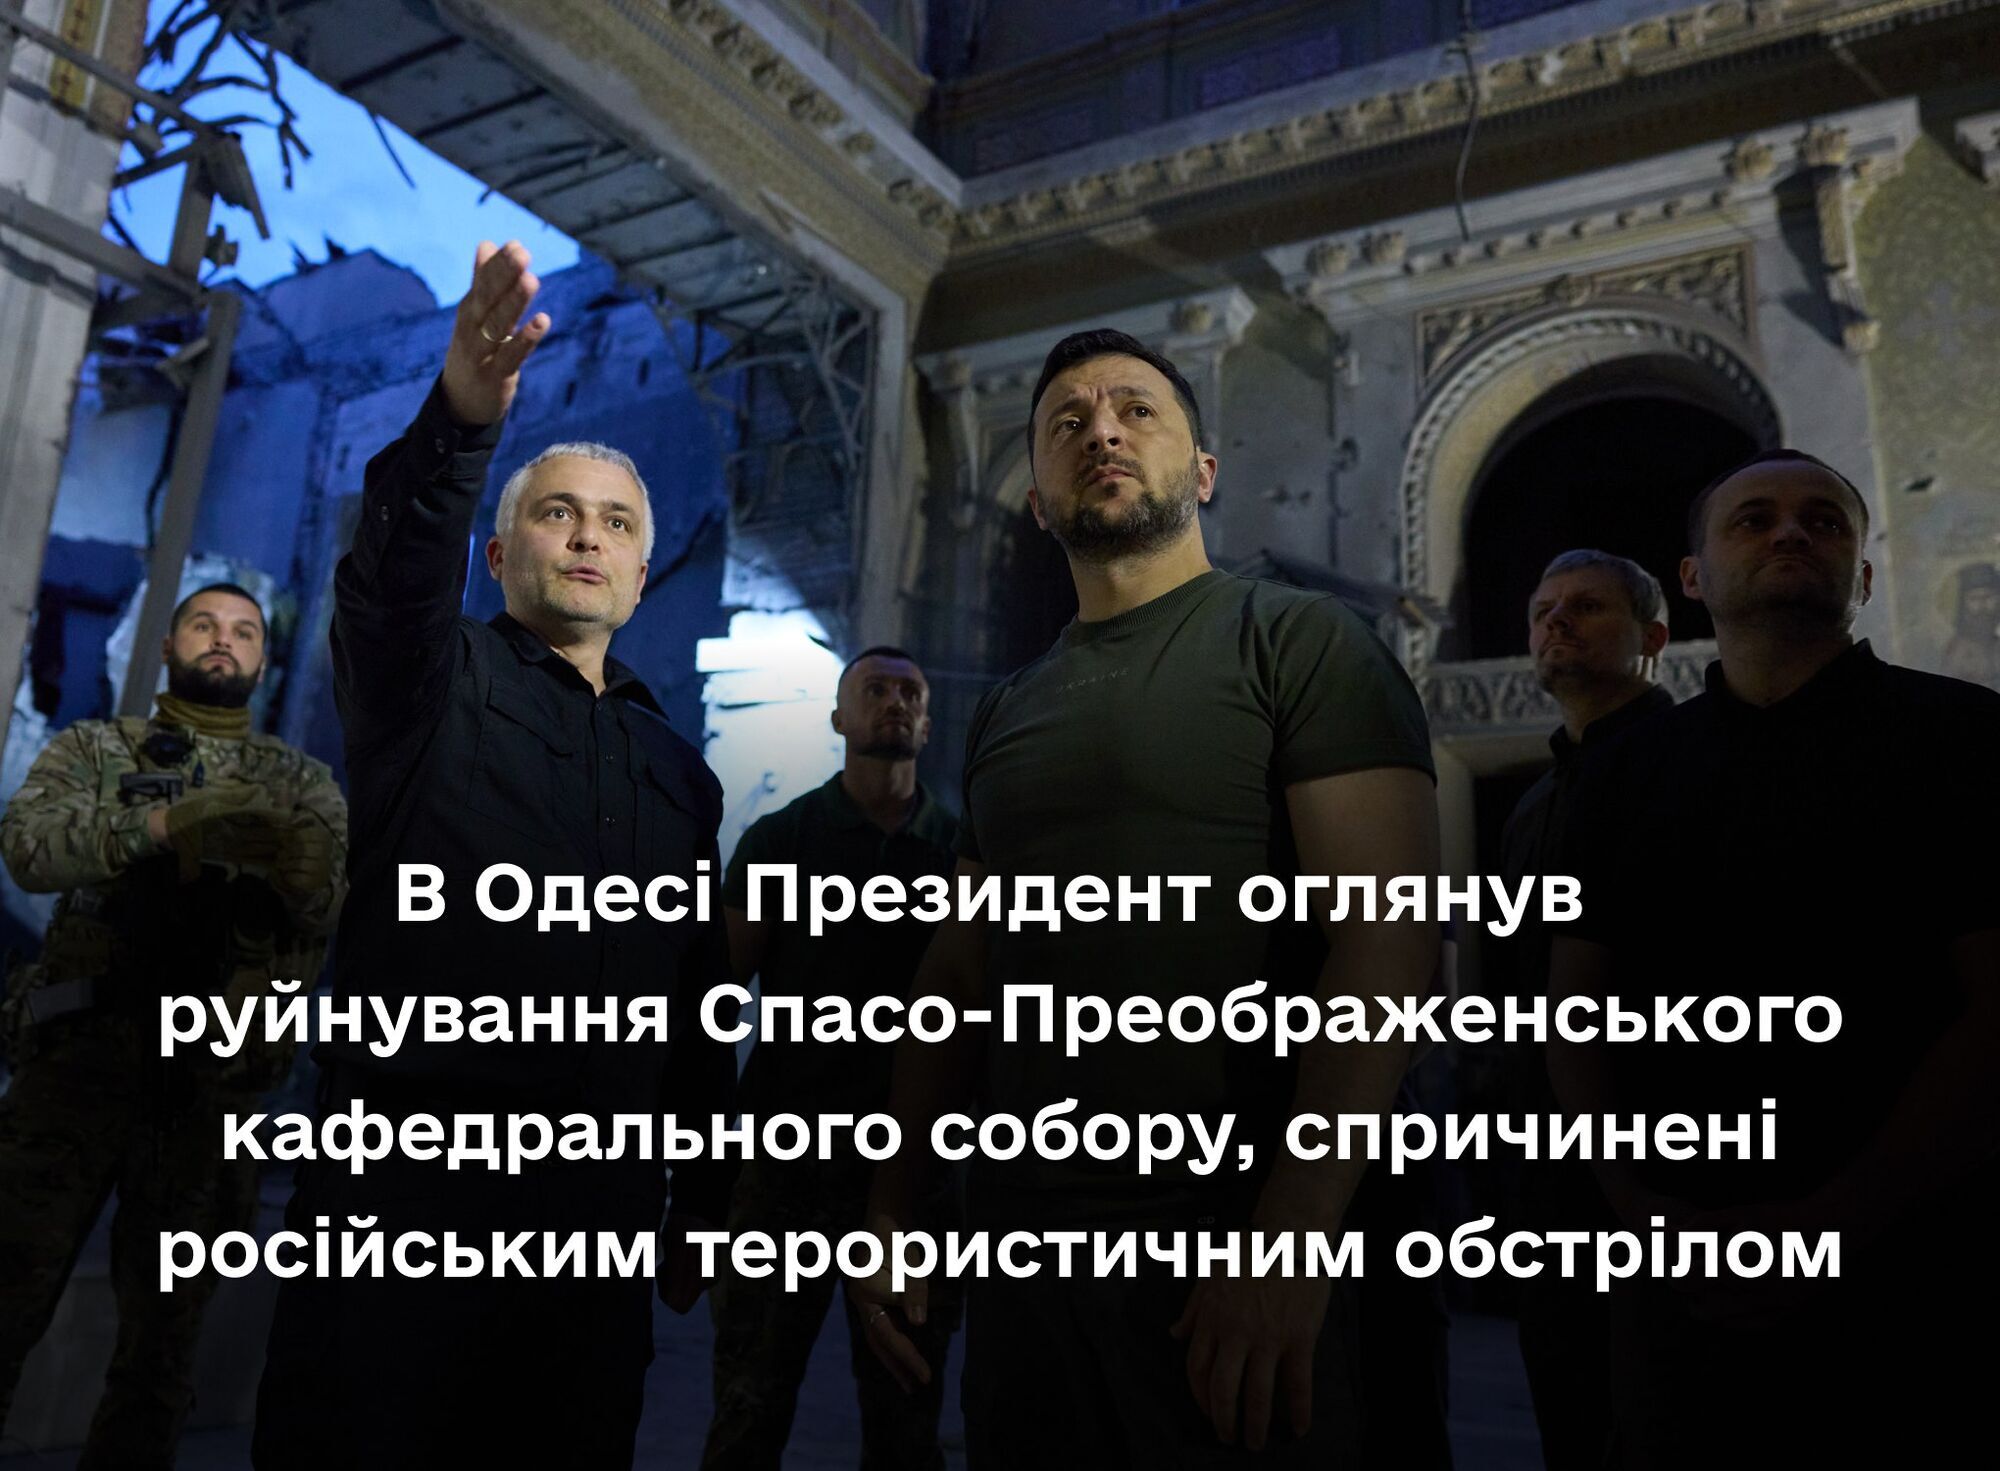 Zelenskyy visited the Transfiguration Cathedral of Odesa destroyed by the occupiers. Photos and video